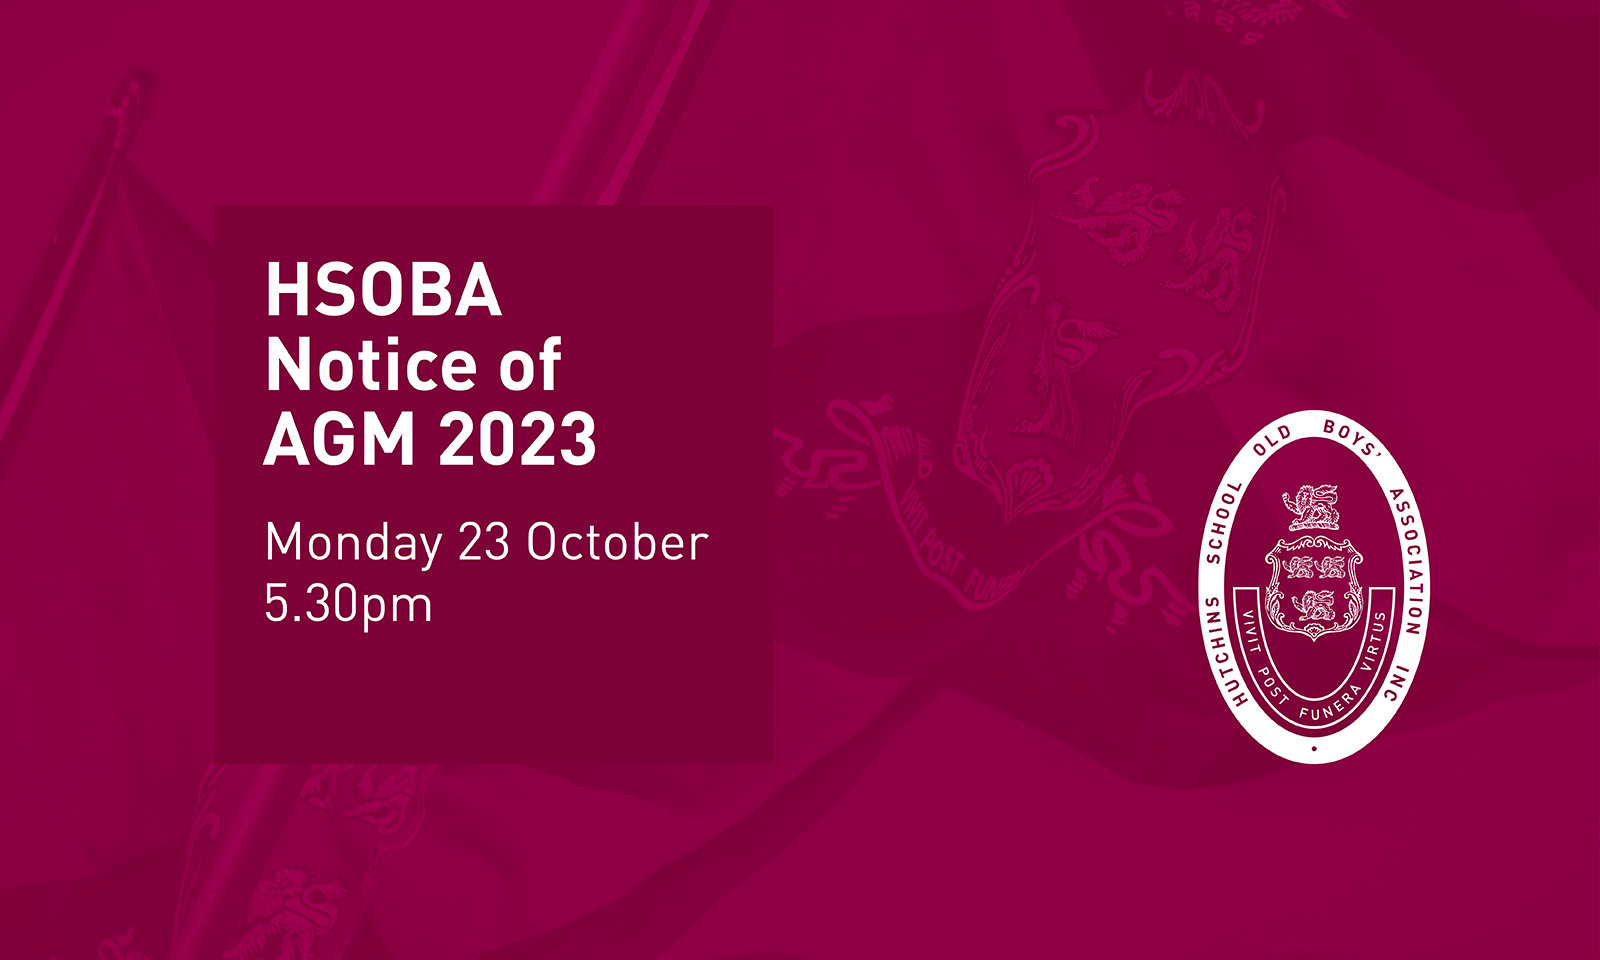 HSOBA Notice of AGM 2023 鈥� 23 October 2023 at 5.30pm in the Hutchins Board Room